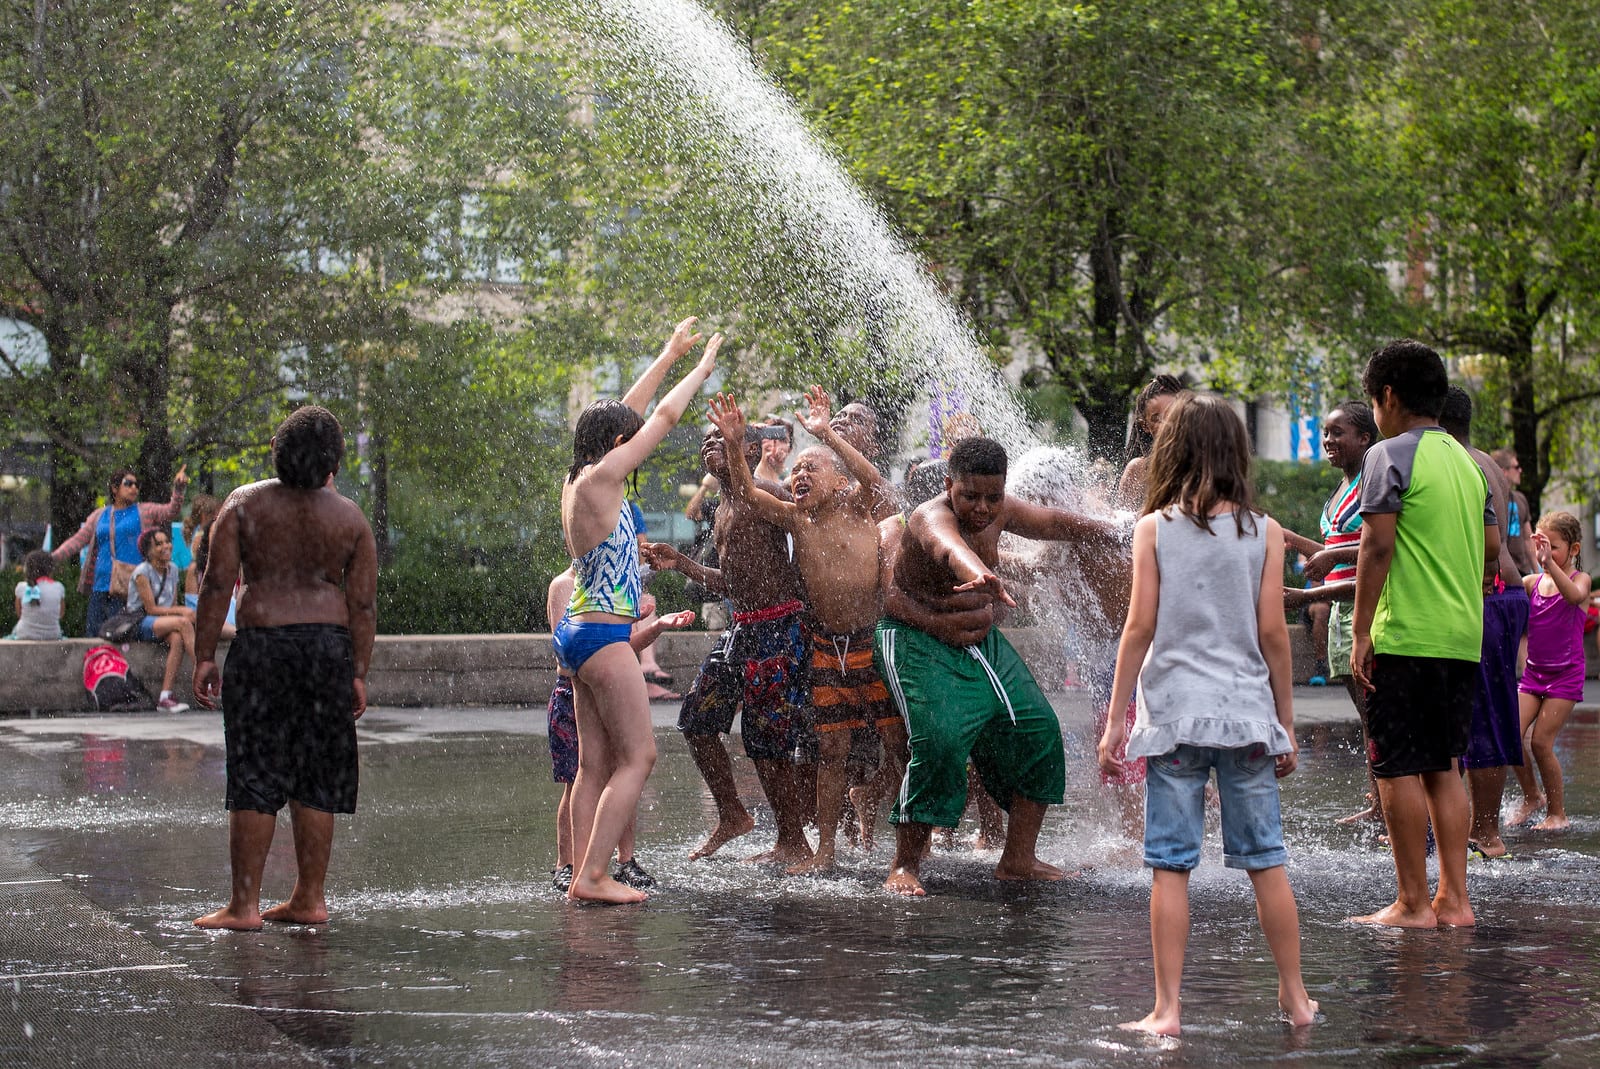 A diverse group of young people splashing around in a fountain in a Chicago park on a hot day.